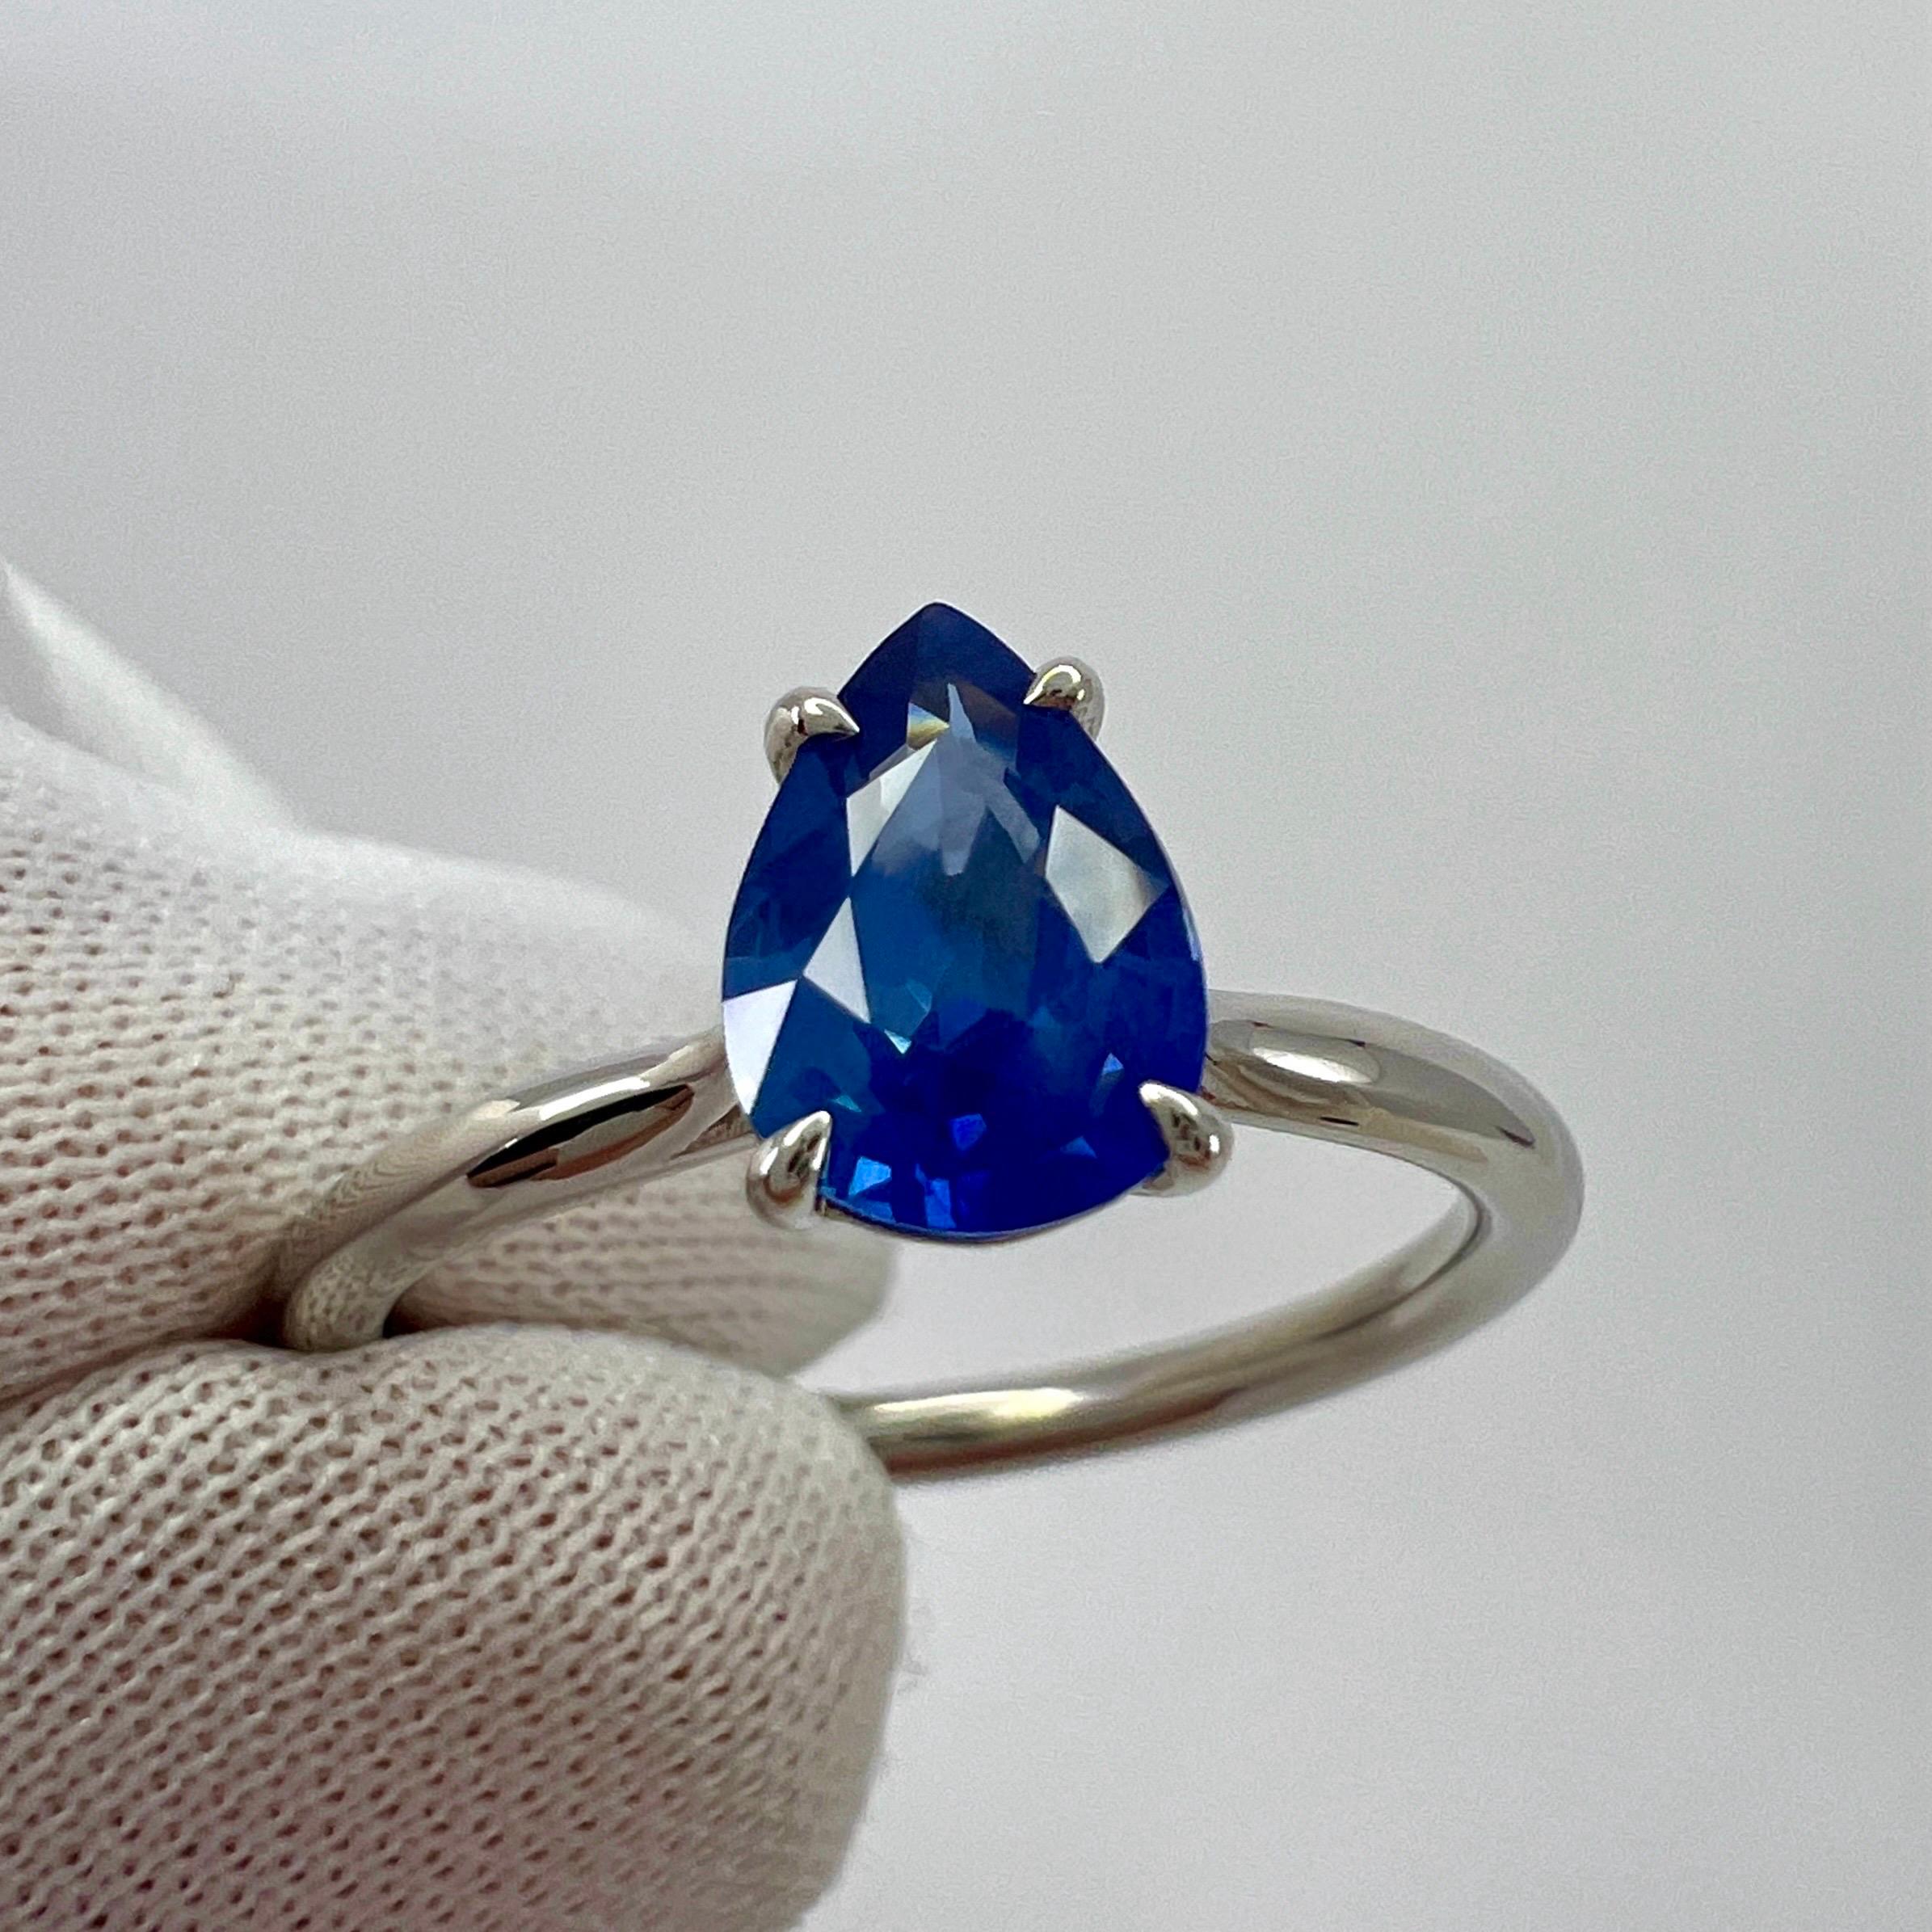 Natural Vivid Cornflower Blue Sapphire 18k White Gold Solitaire Ring.

1.17 Carat sapphire with a stunning vivid cornflower blue colour.
Also has very good clarity, clean stone with only some small natural inclusions visible when looking